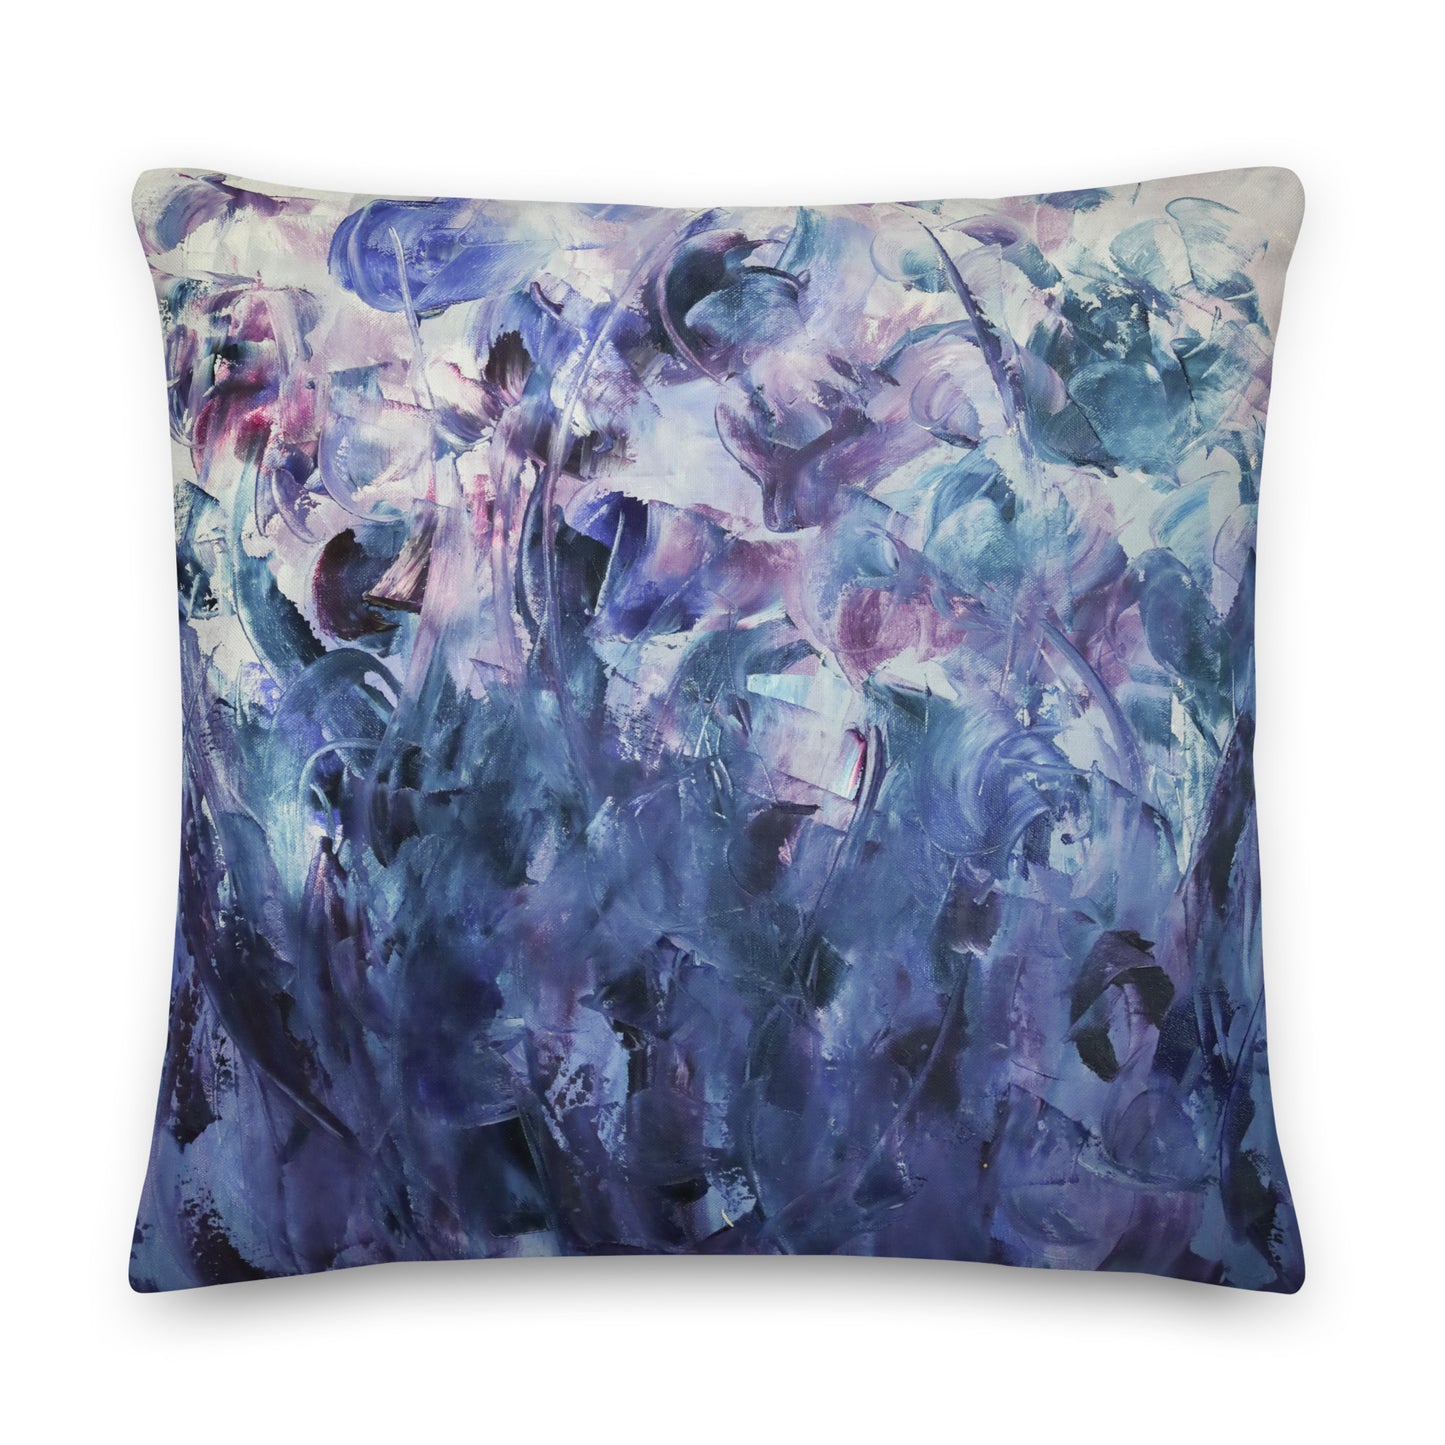 Violet in the wind - cushion 18 x 18